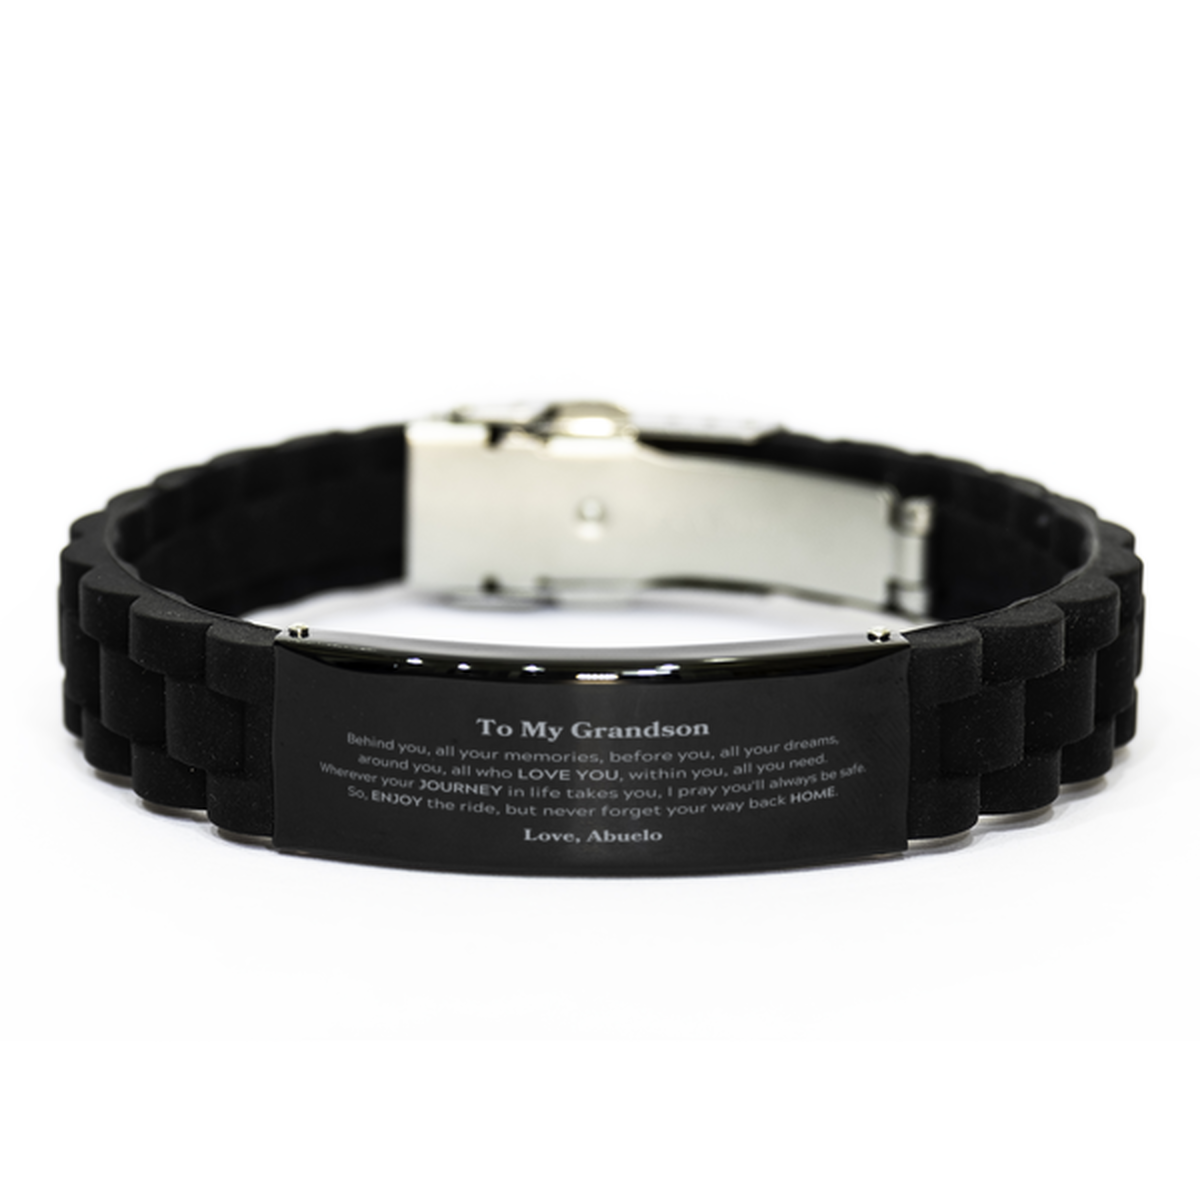 To My Grandson Graduation Gifts from Abuelo, Grandson Black Glidelock Clasp Bracelet Christmas Birthday Gifts for Grandson Behind you, all your memories, before you, all your dreams. Love, Abuelo